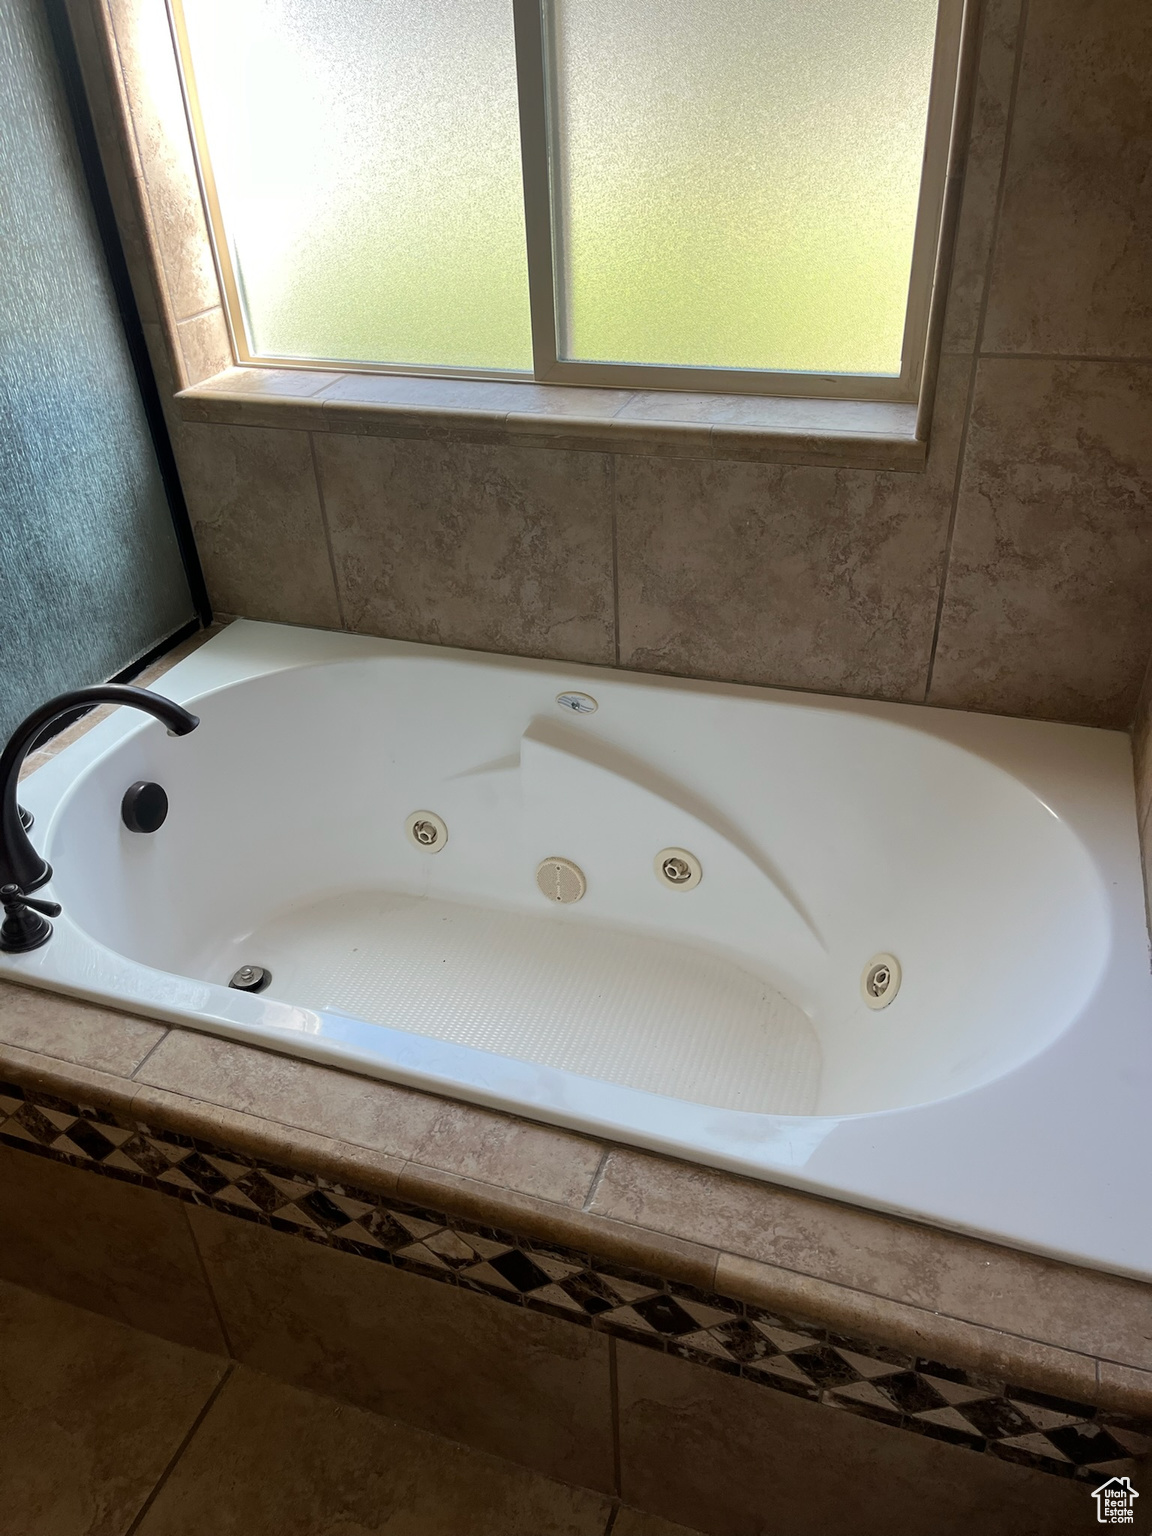 Primary bath jetted tub